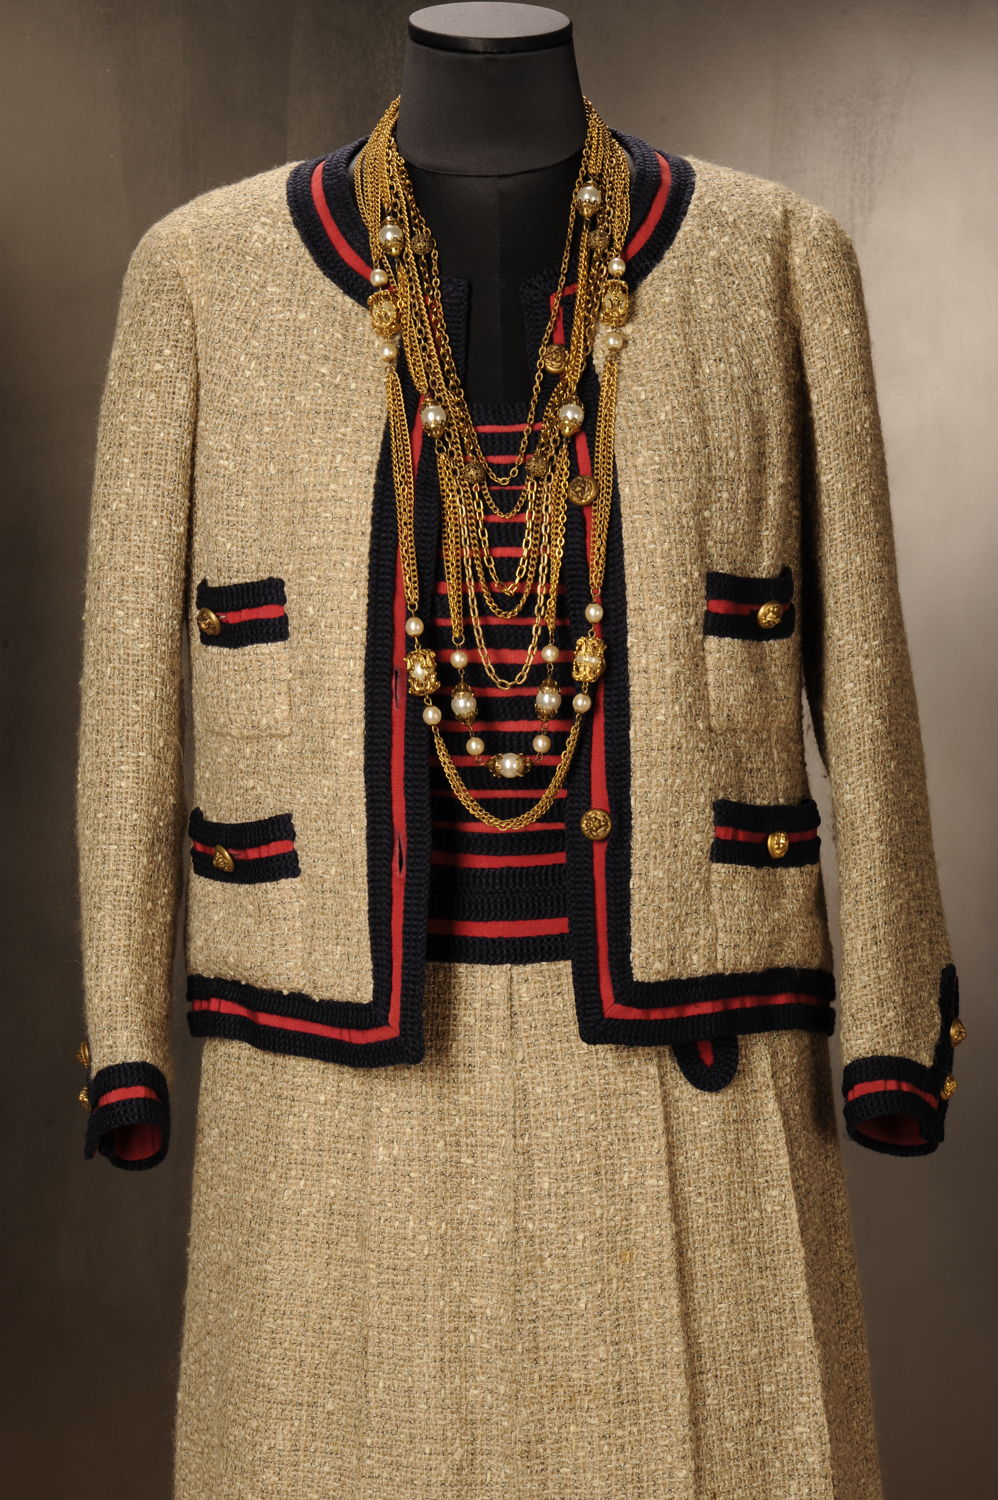 Chanel suit donated by HM Queen Paola from Belgium, MoMu Collection T06/1101ABC, (c) Draiflessen, Photo: Christin Losta